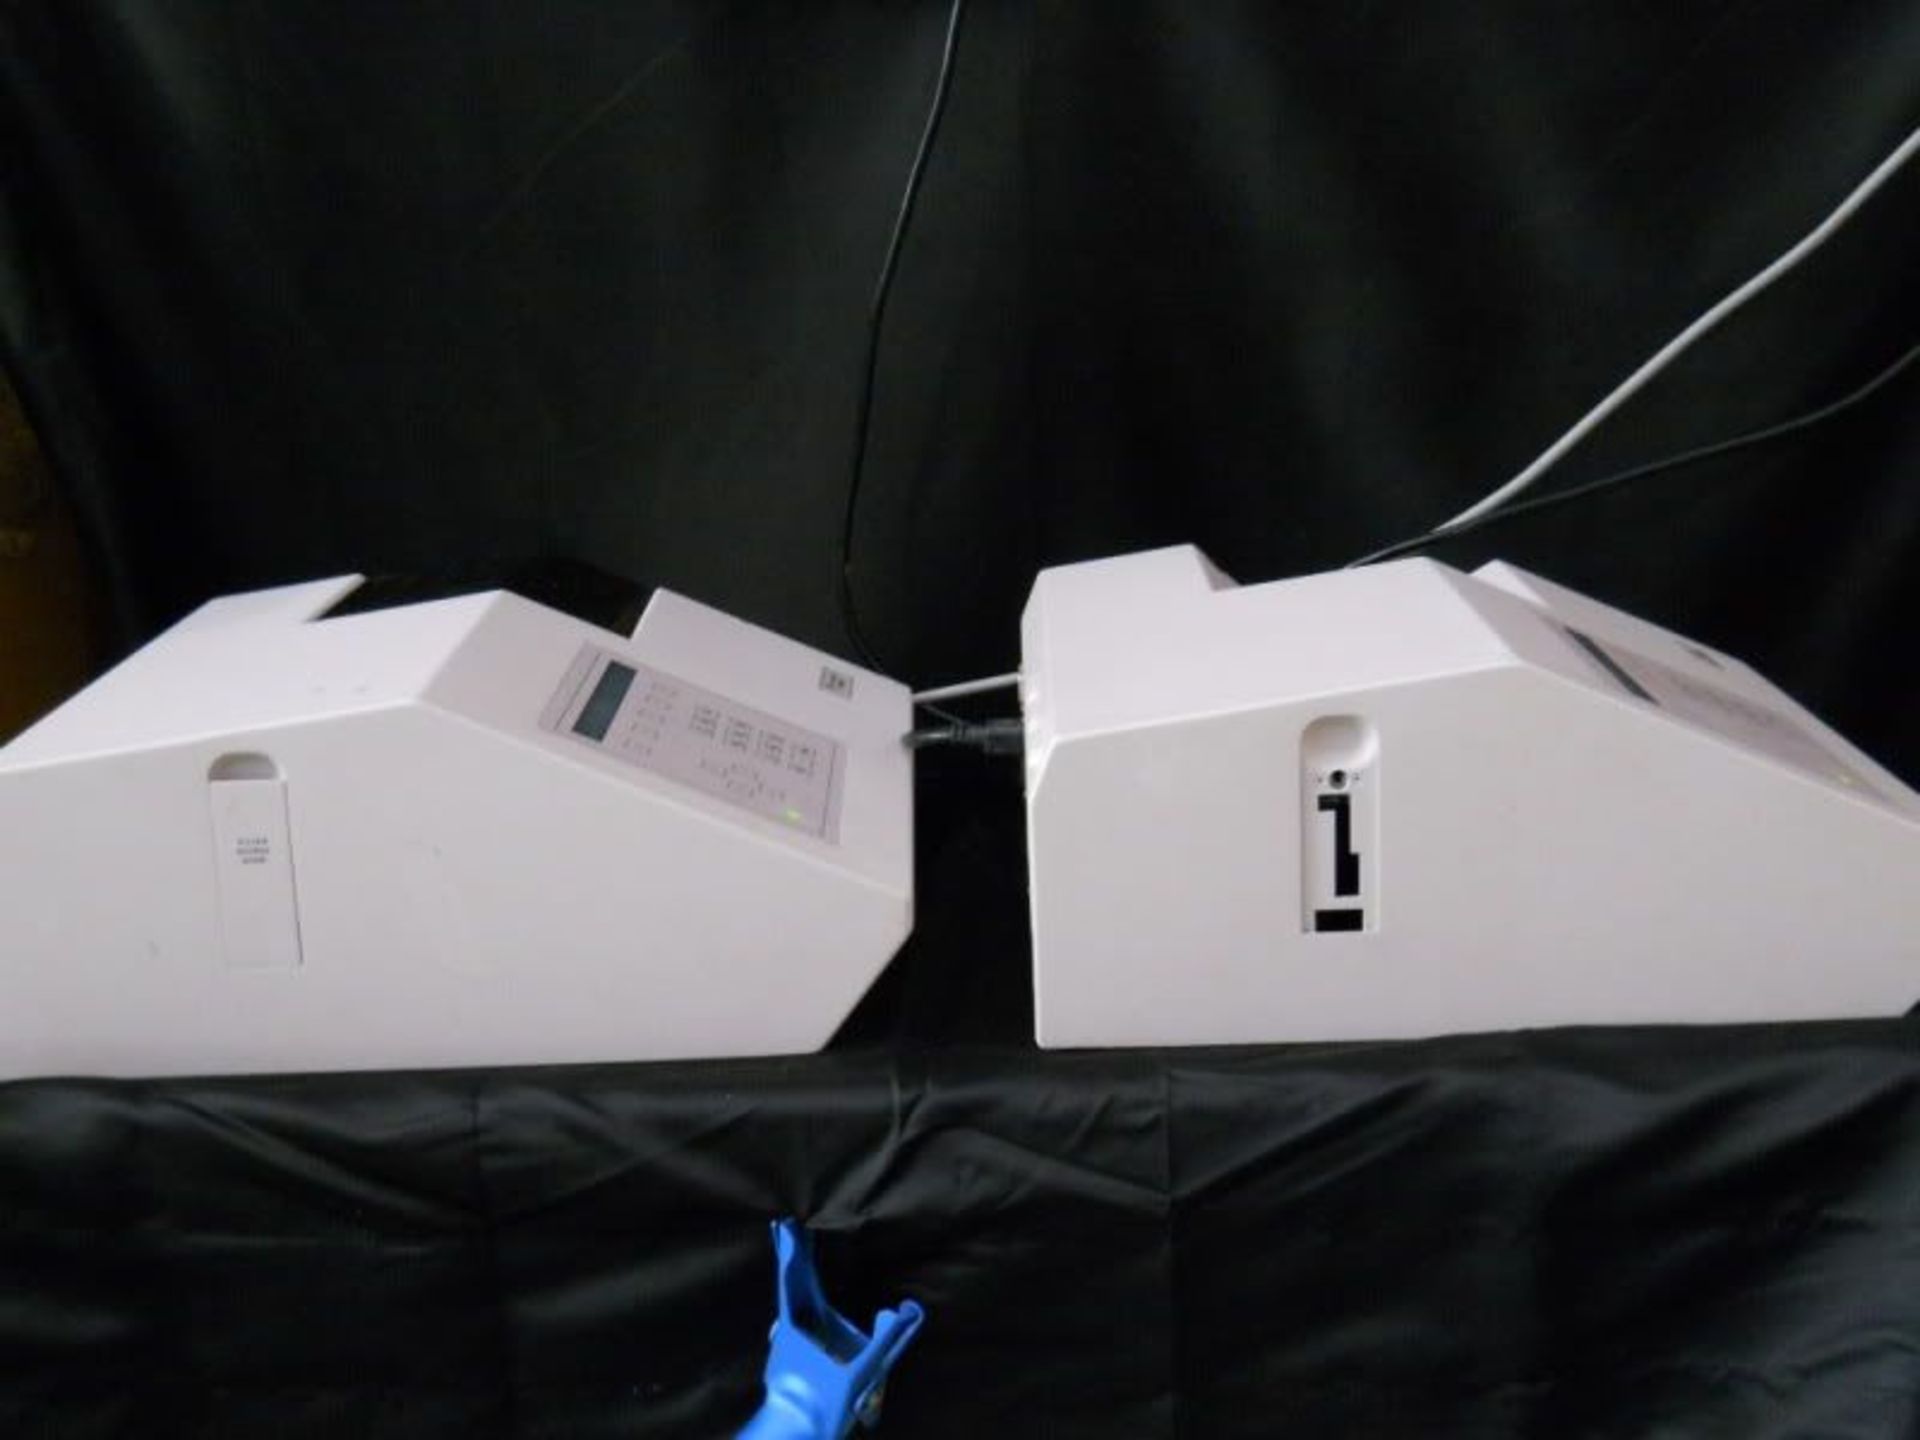 Lot of 2 Dynatech MR5000 Microplate Readers (Parts Not Working), Qty 1, 221094217837 - Image 6 of 12